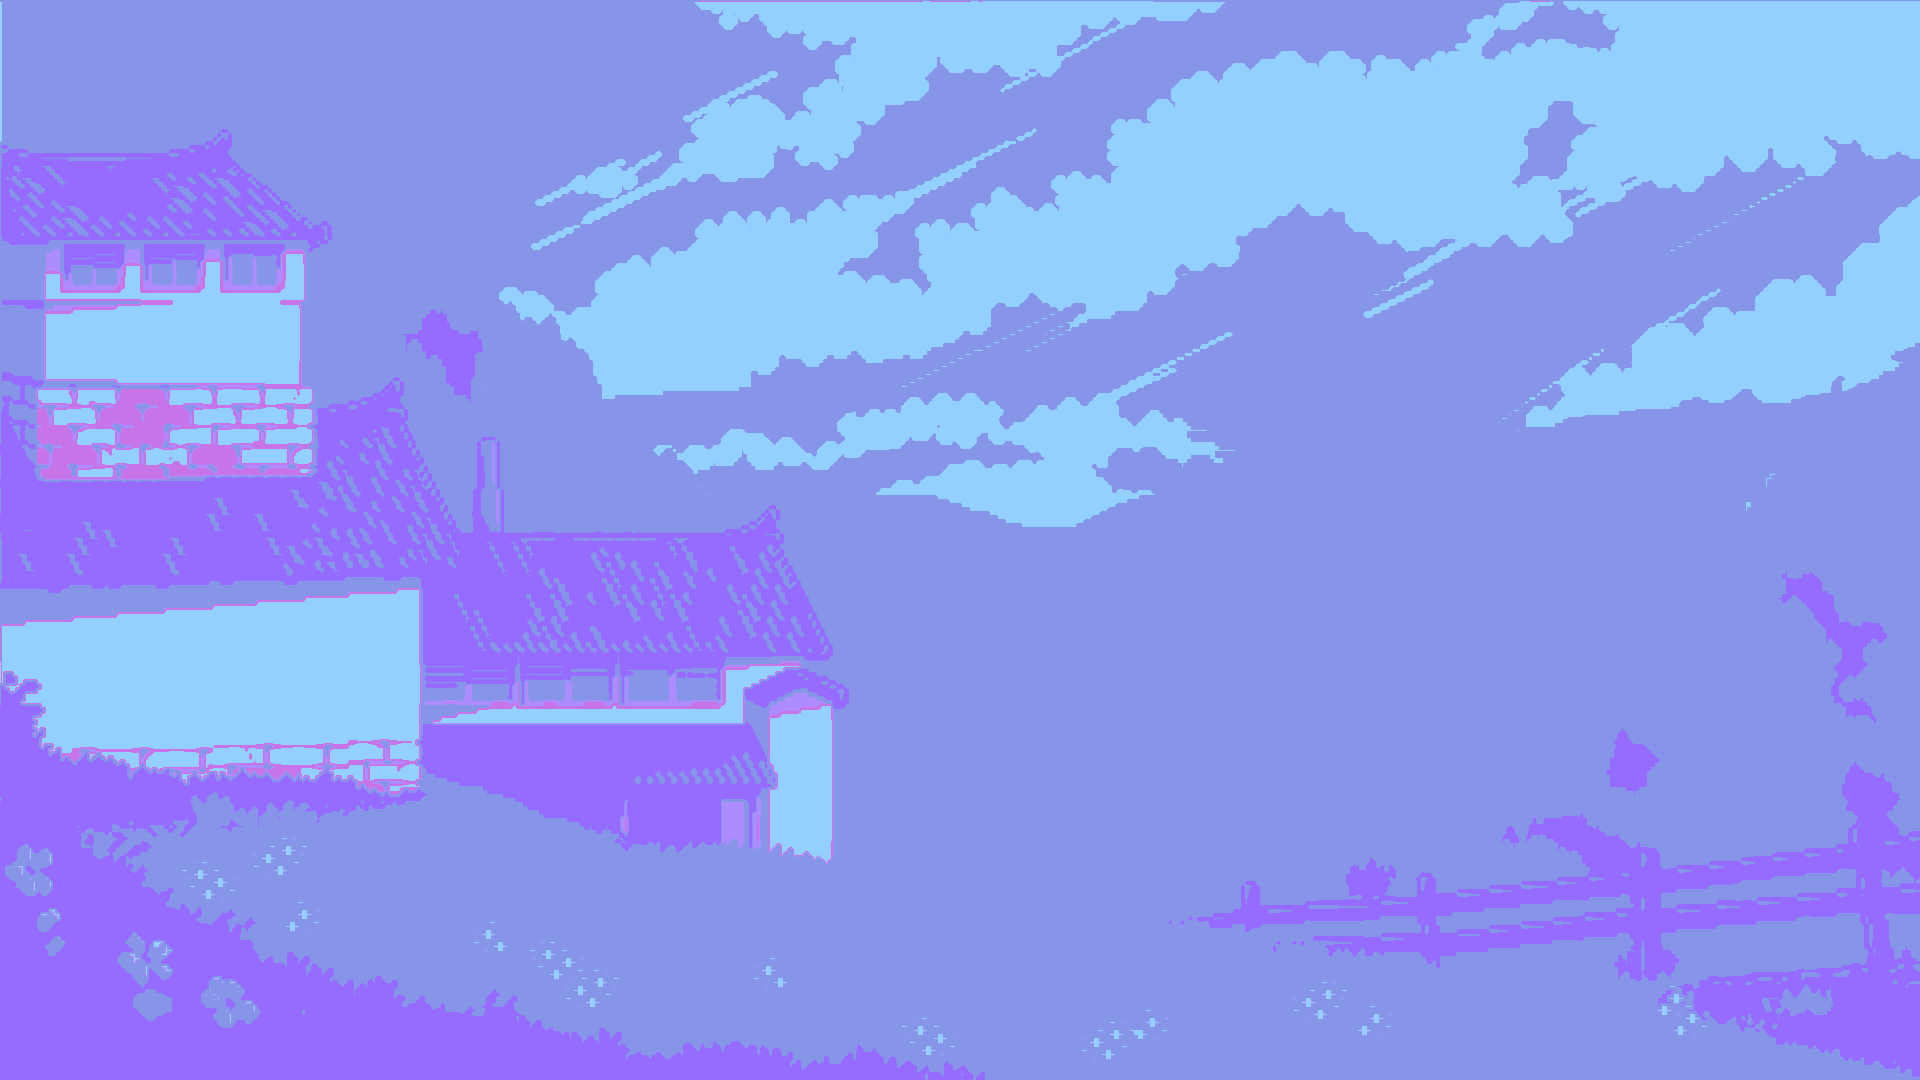 A pixel art image of a purple and blue house with a red roof - Pixel art